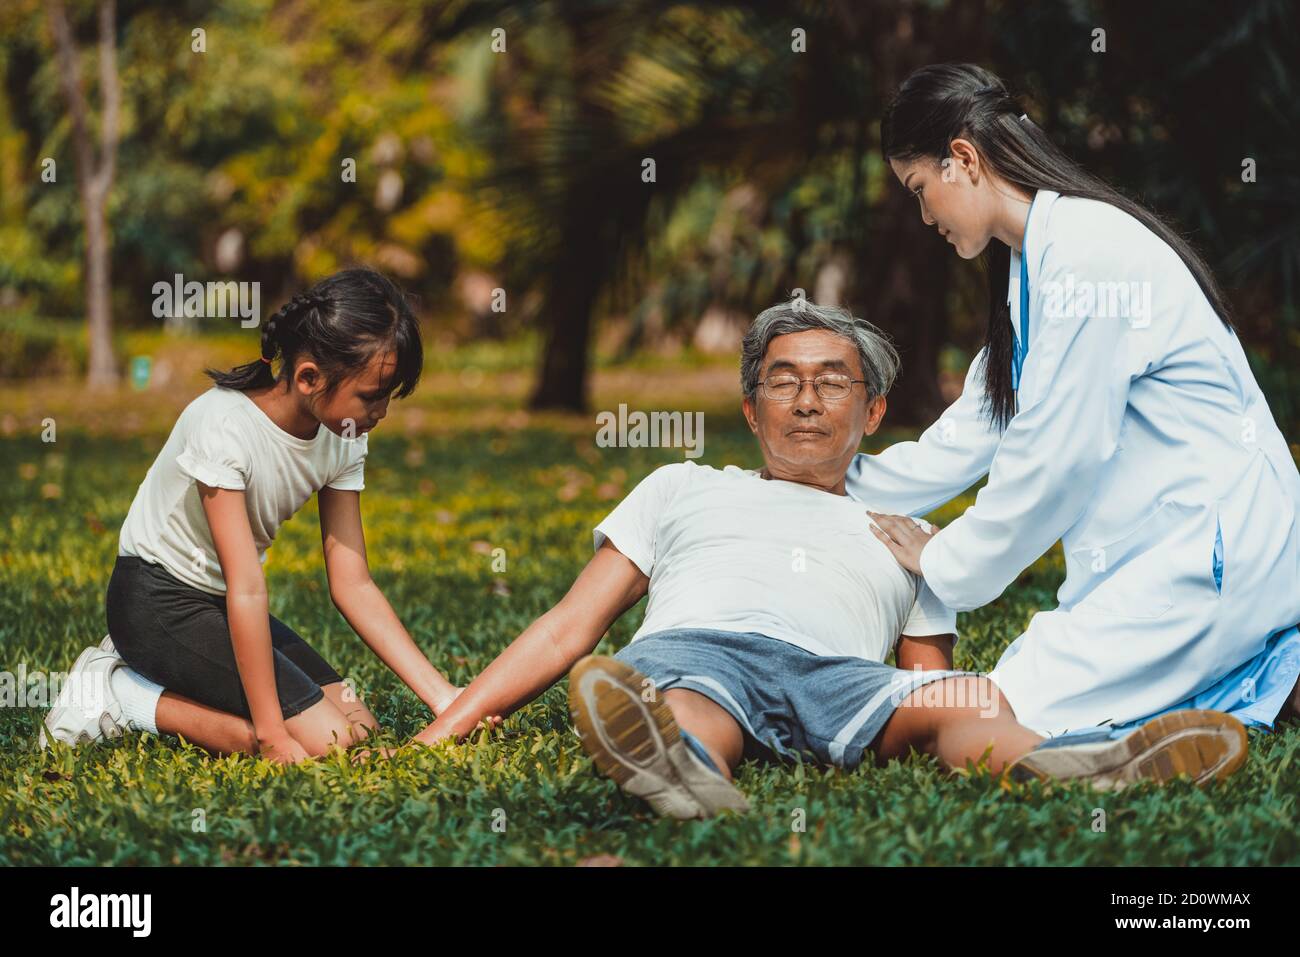 Senior man having chest pain or heart attack in the park. Old people elderly healthcare concept. Stock Photo